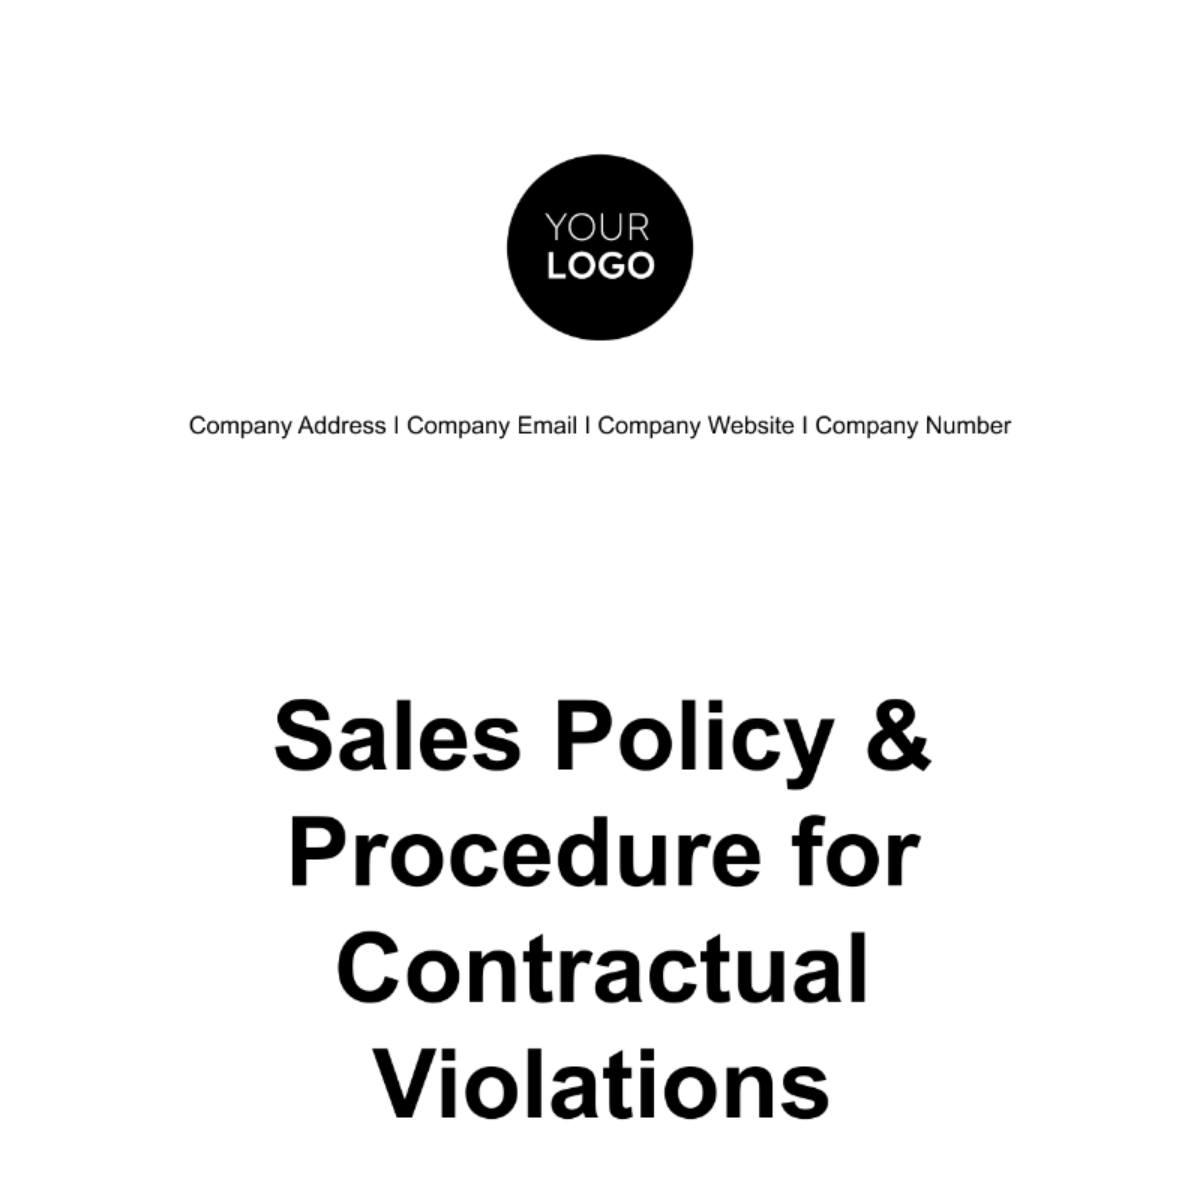 Free Sales Policy & Procedure for Contractual Violations Template